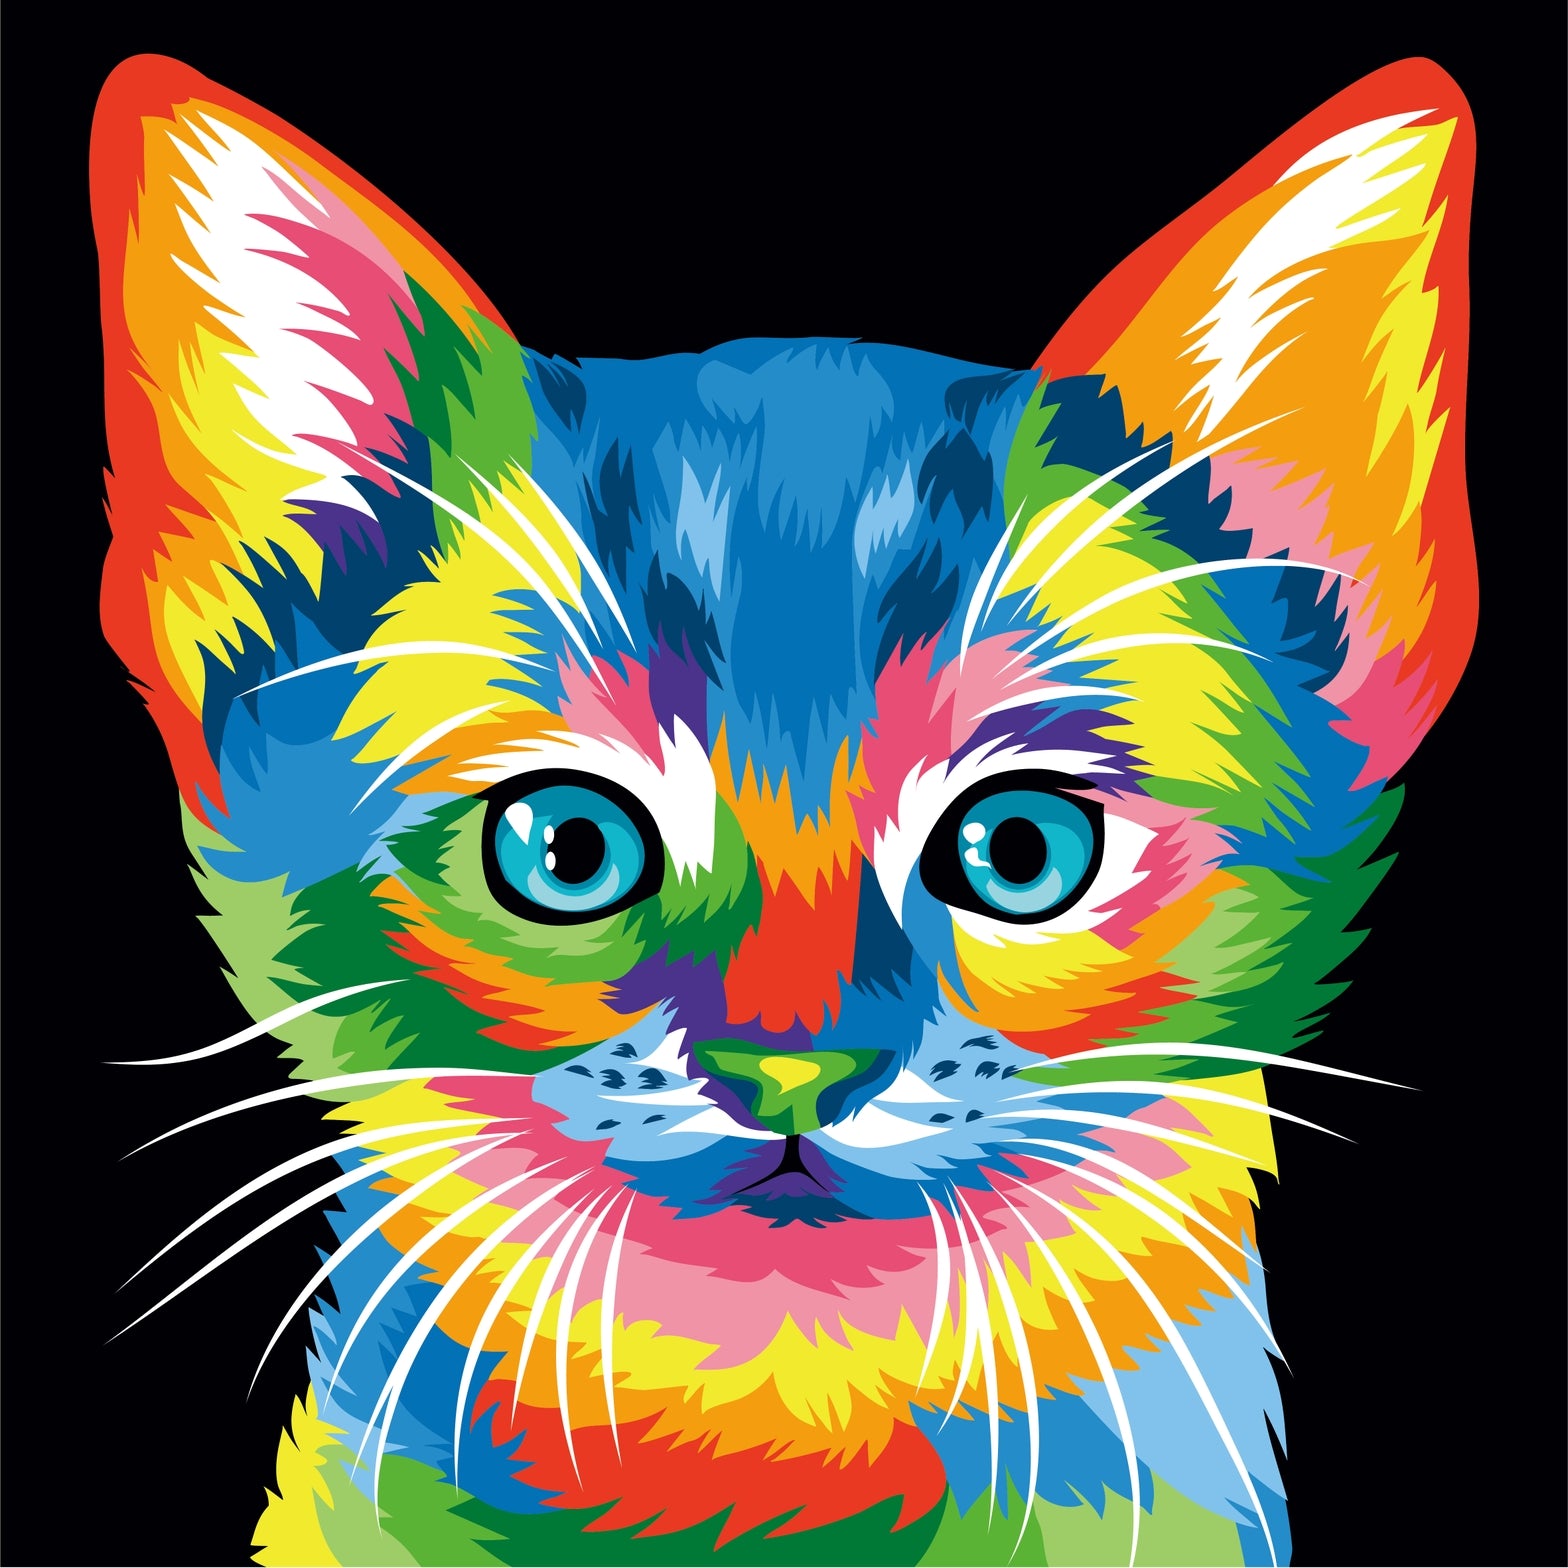 Colorful Kitten - Pop Art Wall Decor - Paint By Numbers Kit